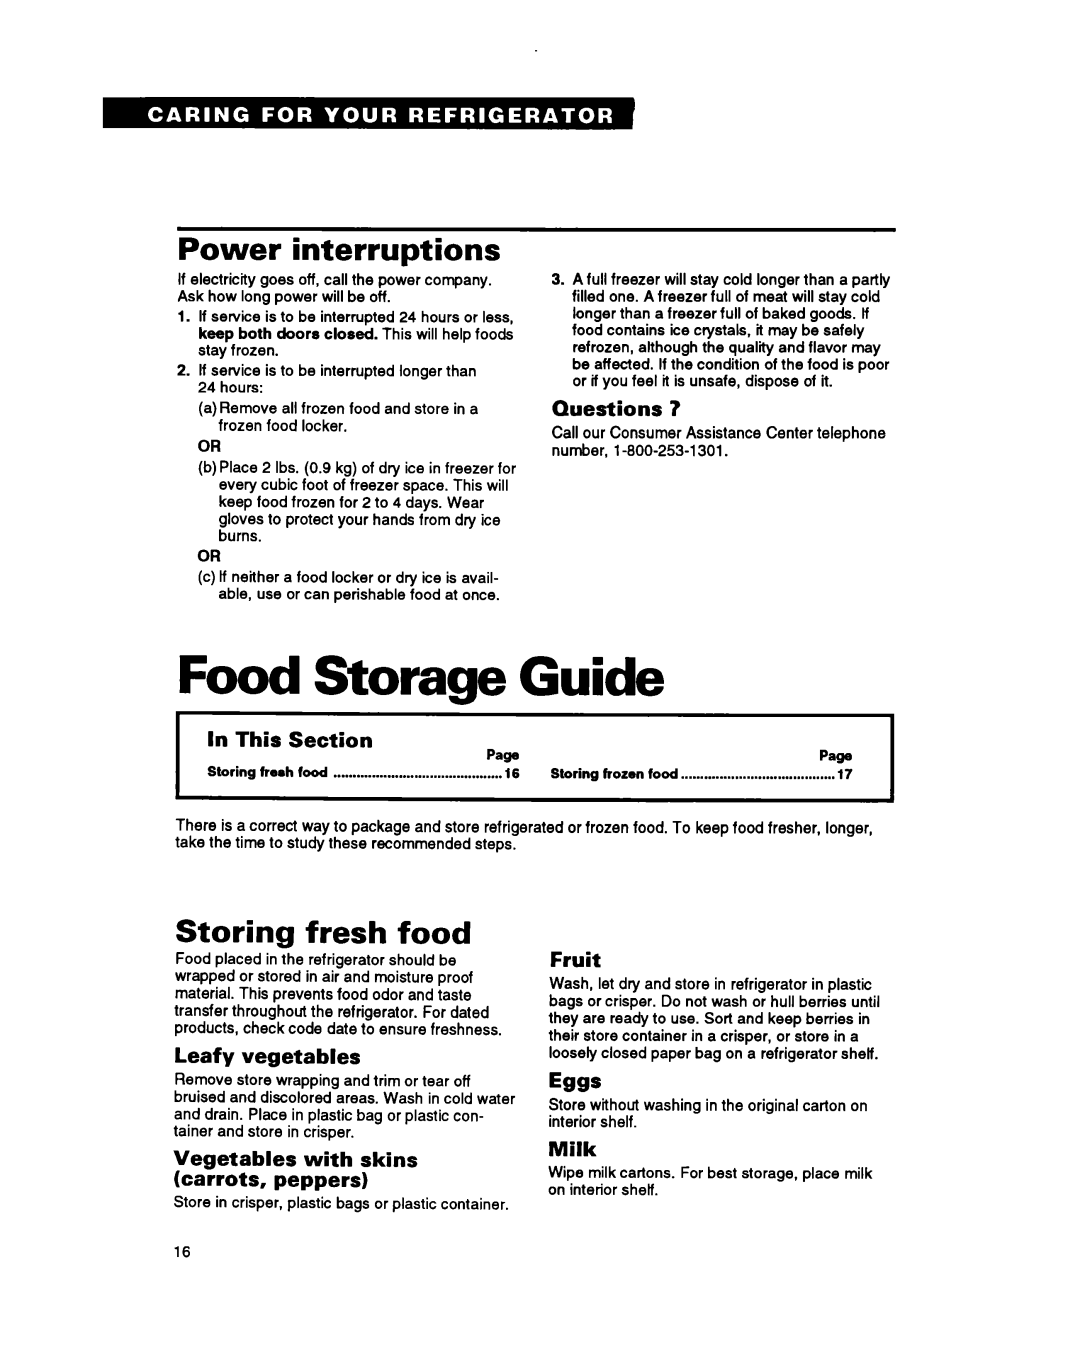 Whirlpool ET20PK Food Storage Guide, Power interruptions, Storing fresh food, Questions, In This Section Pa*Page, Fruit 